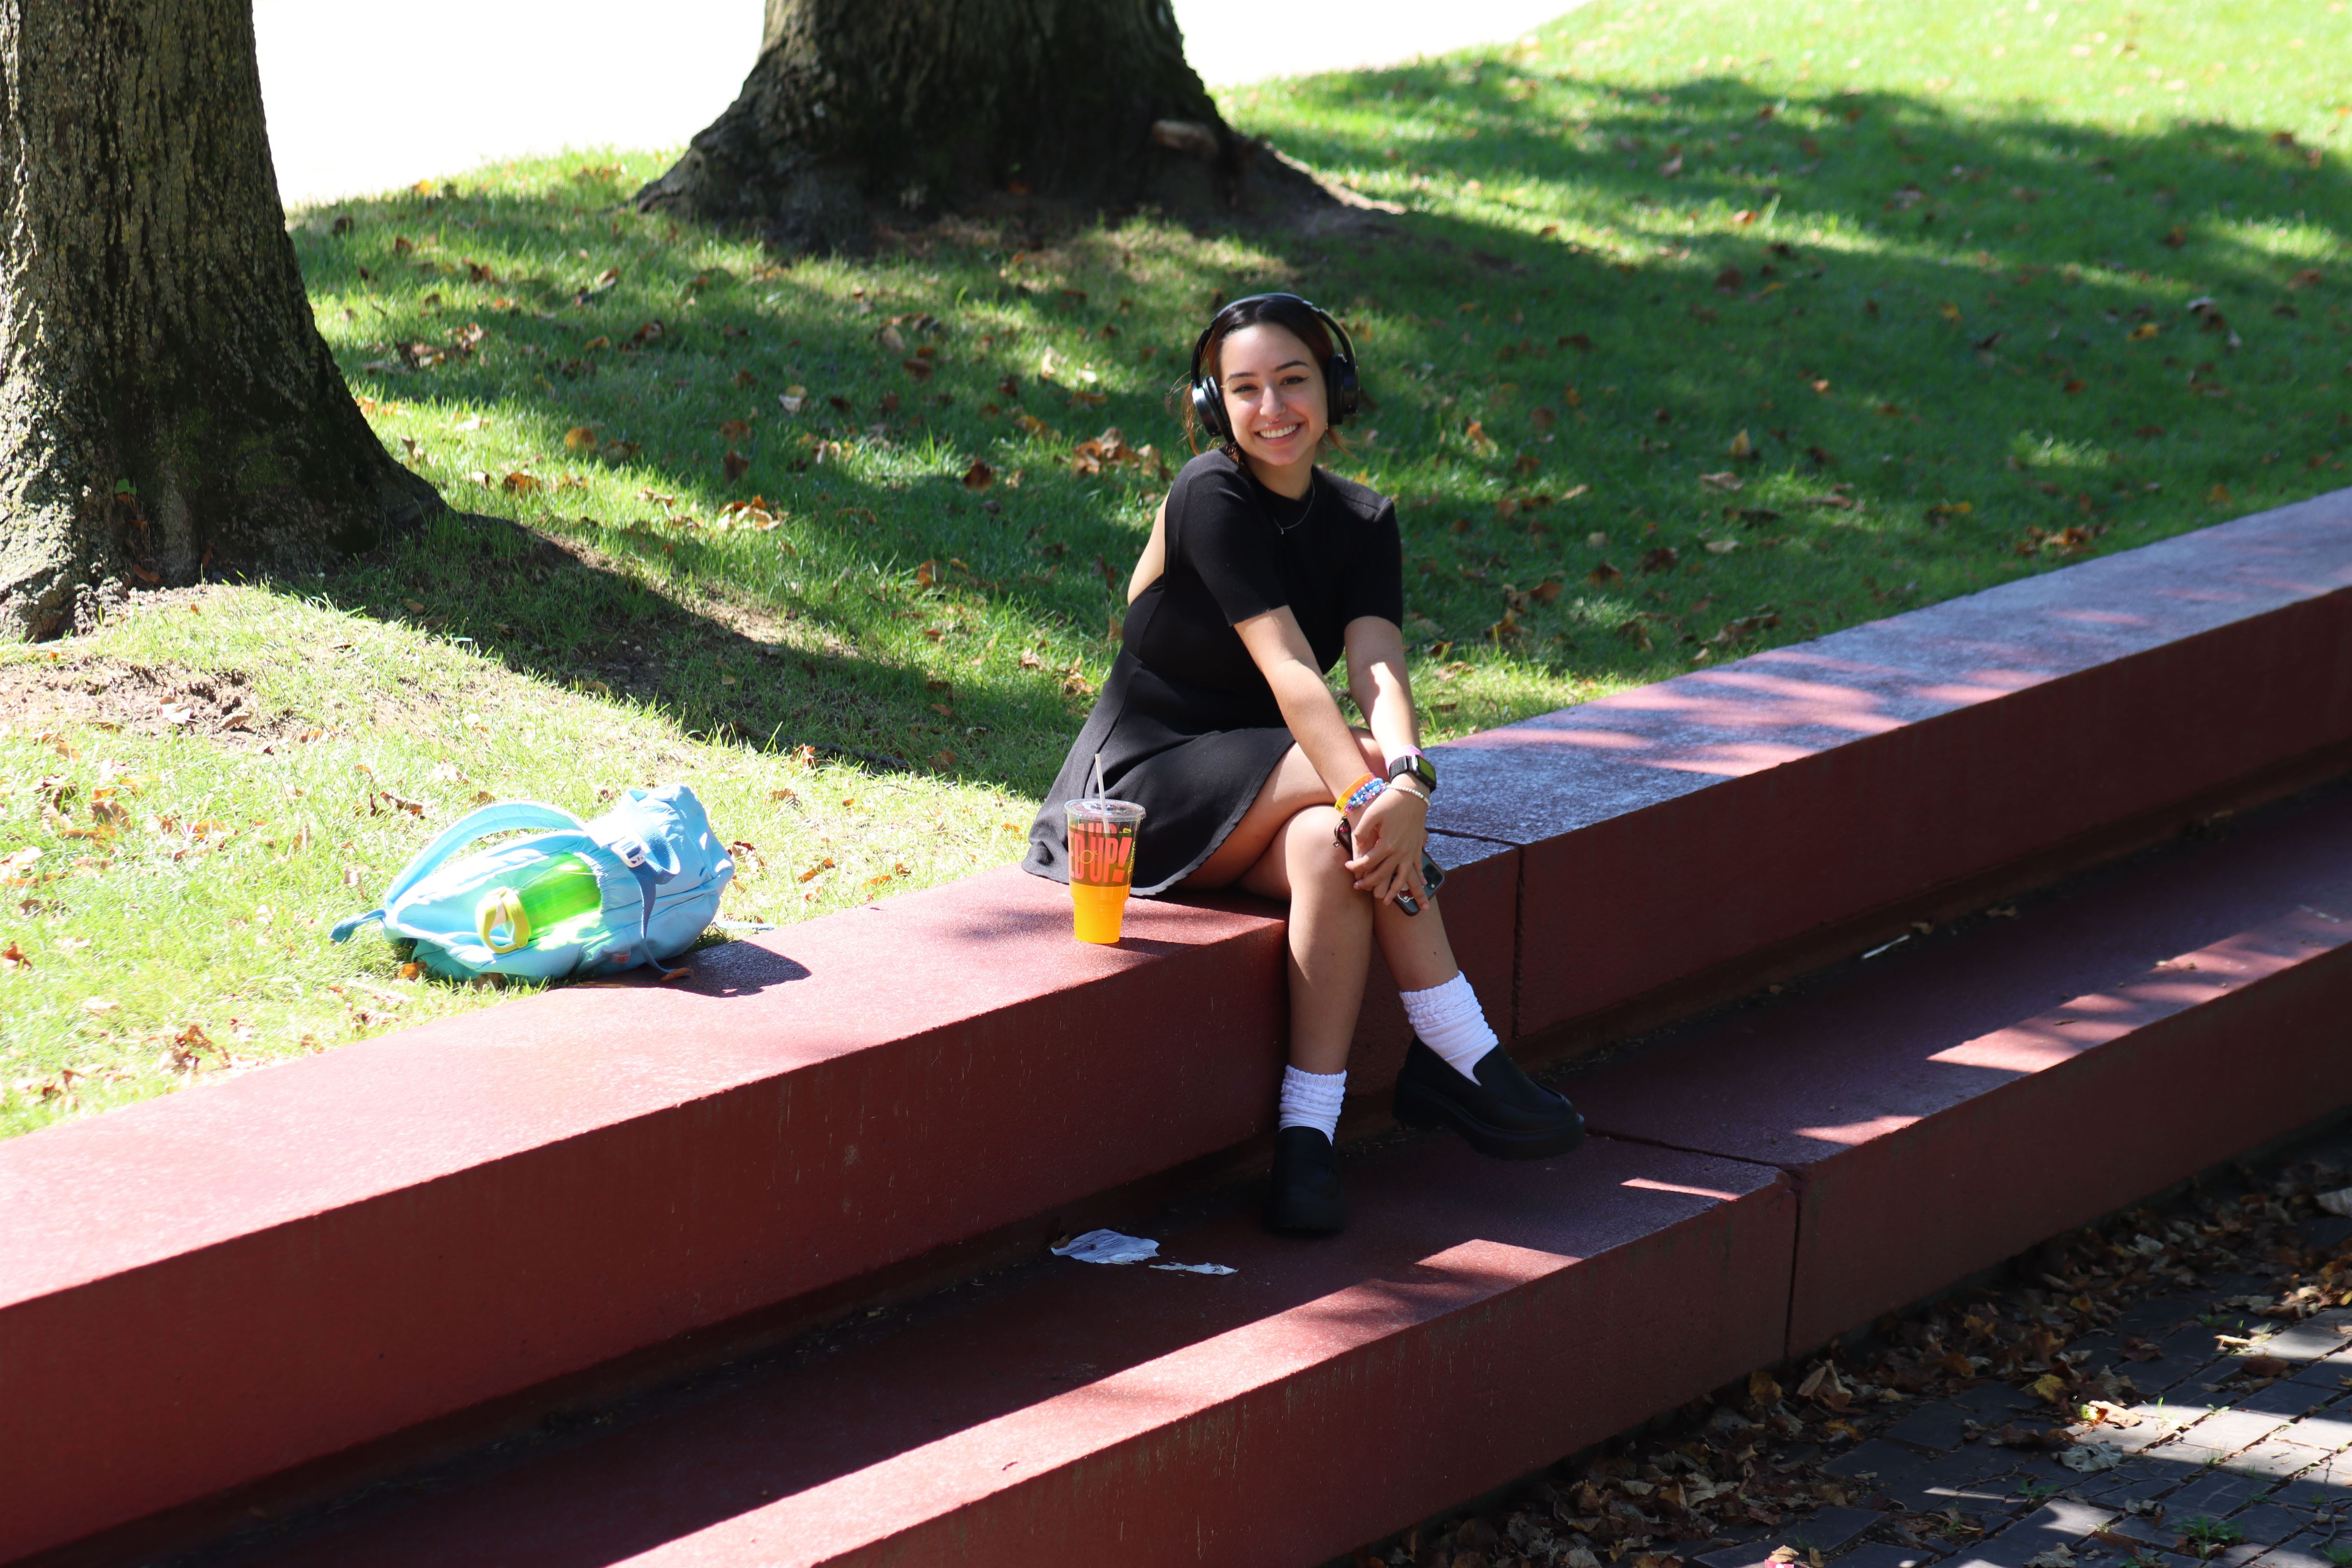 Jenna Marinelli, a Montclair State Freshman, smiles from ear to ear as she enjoys a beautiful day in the quad.
Photo courtesy of Sarah Kurz